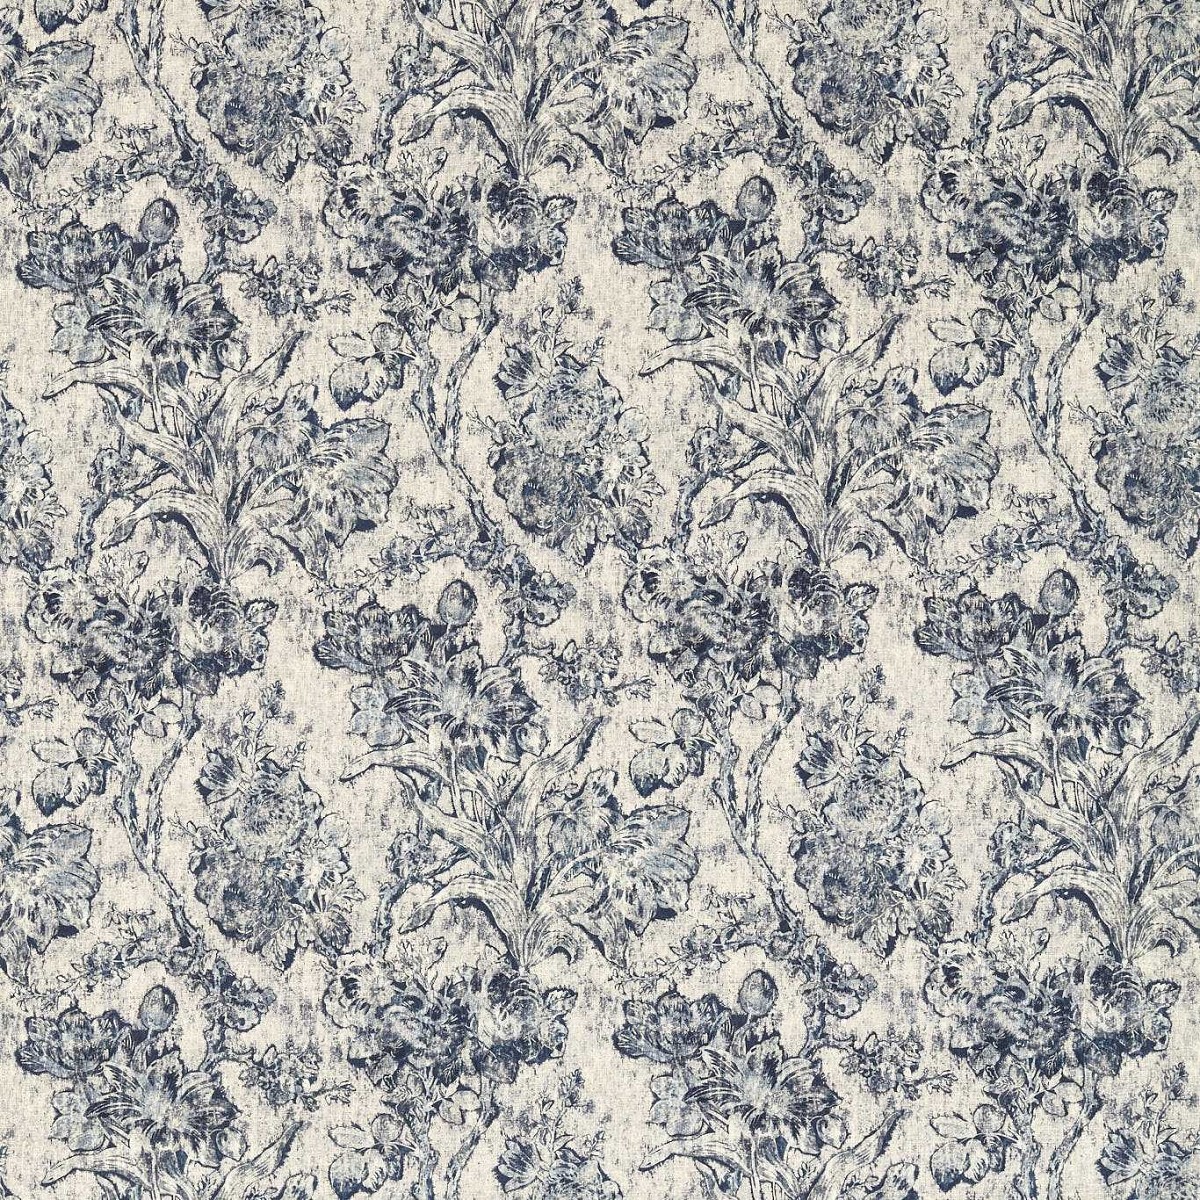 Fringed Tulip Toile Woad Fabric by Sanderson